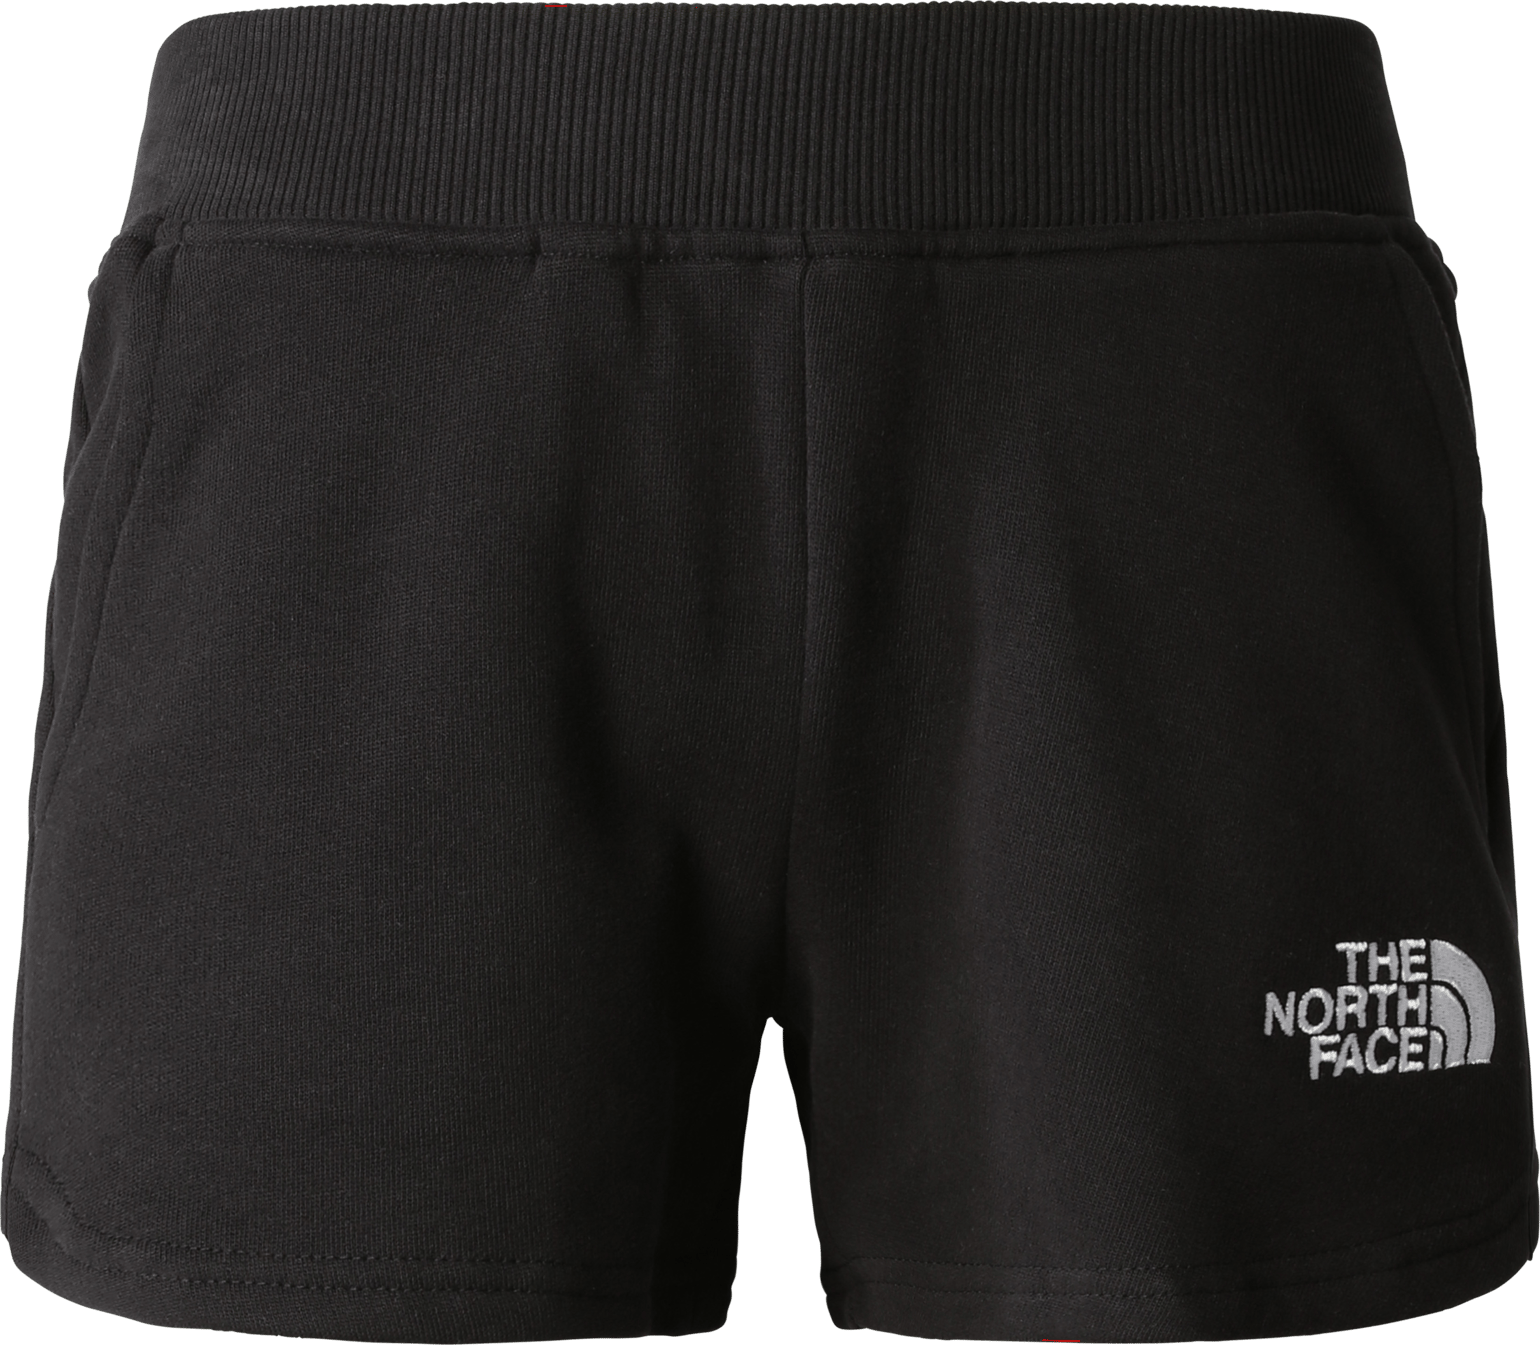 The North Face Girls' Cotton Shorts TNF Black